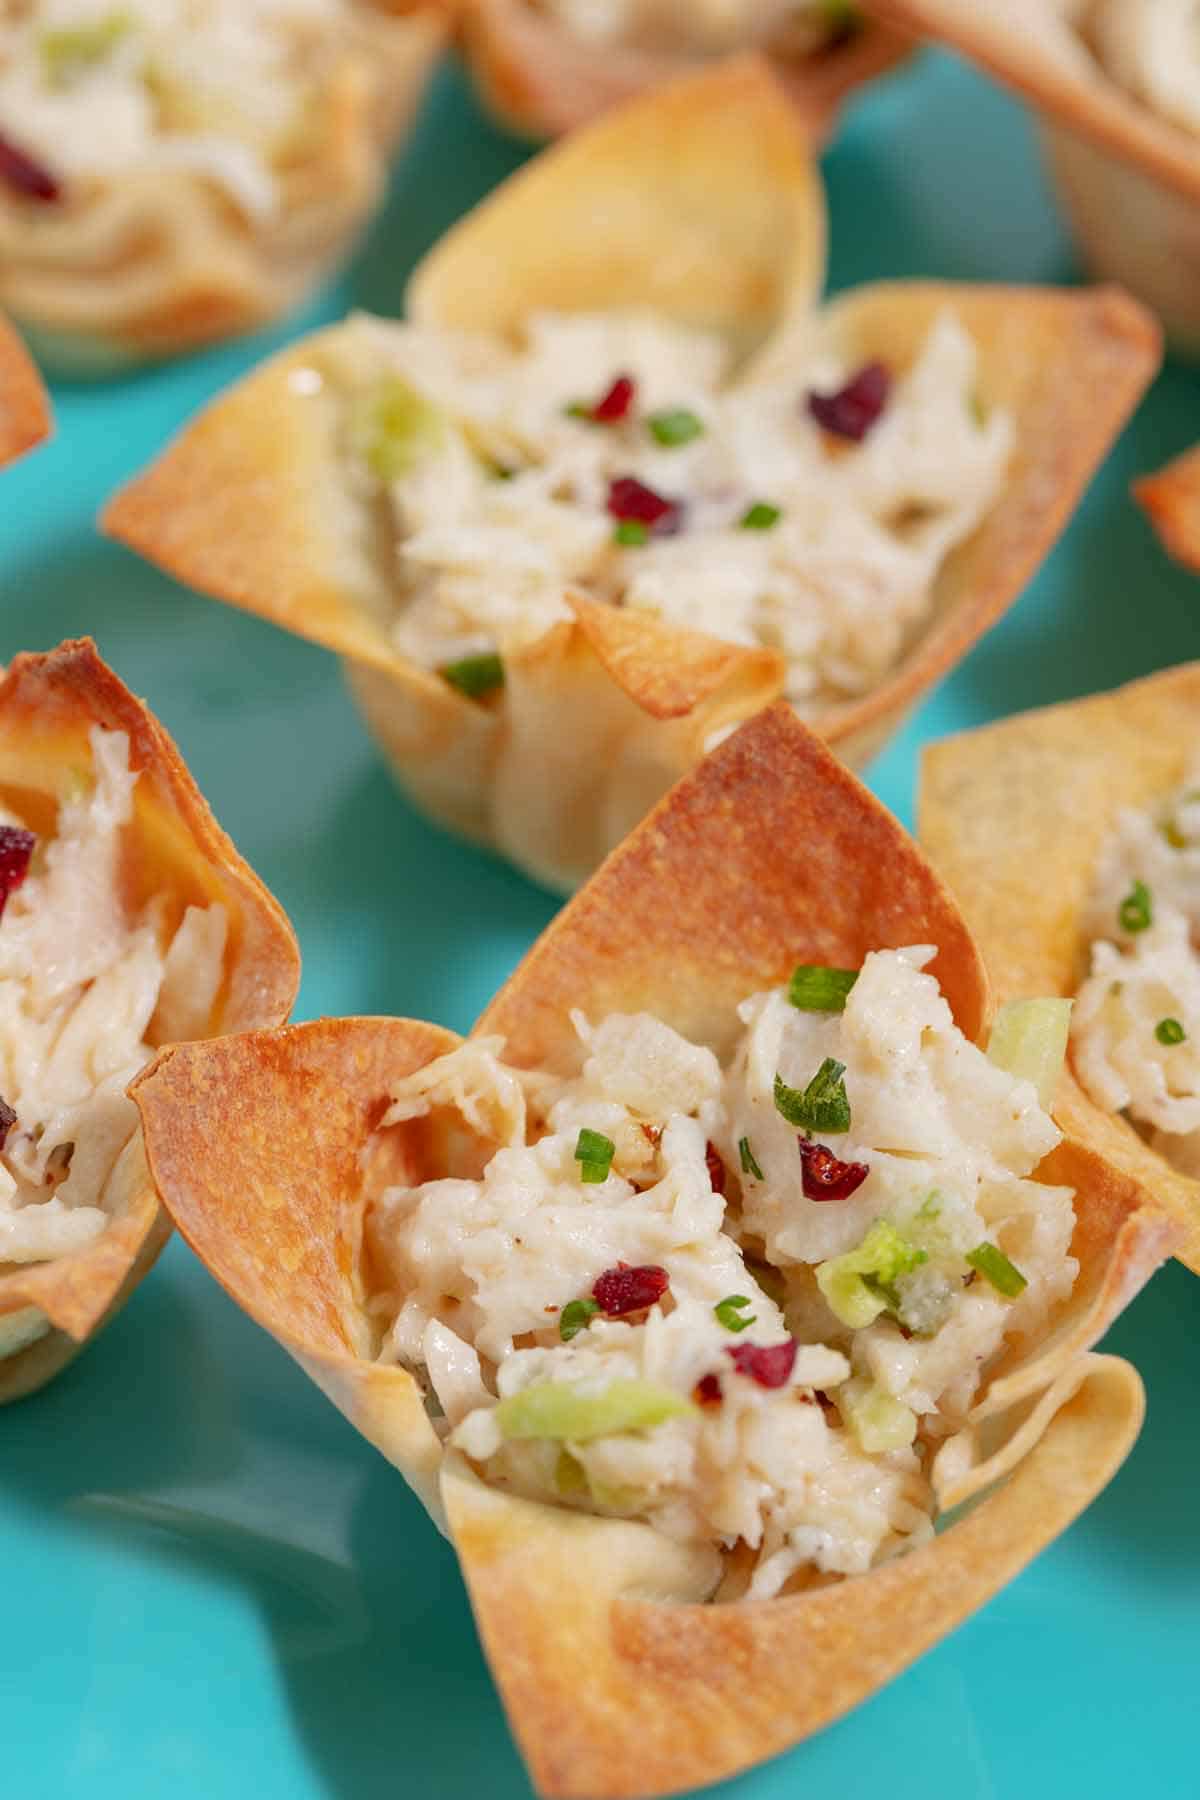 Chicken salad in a won ton cup.